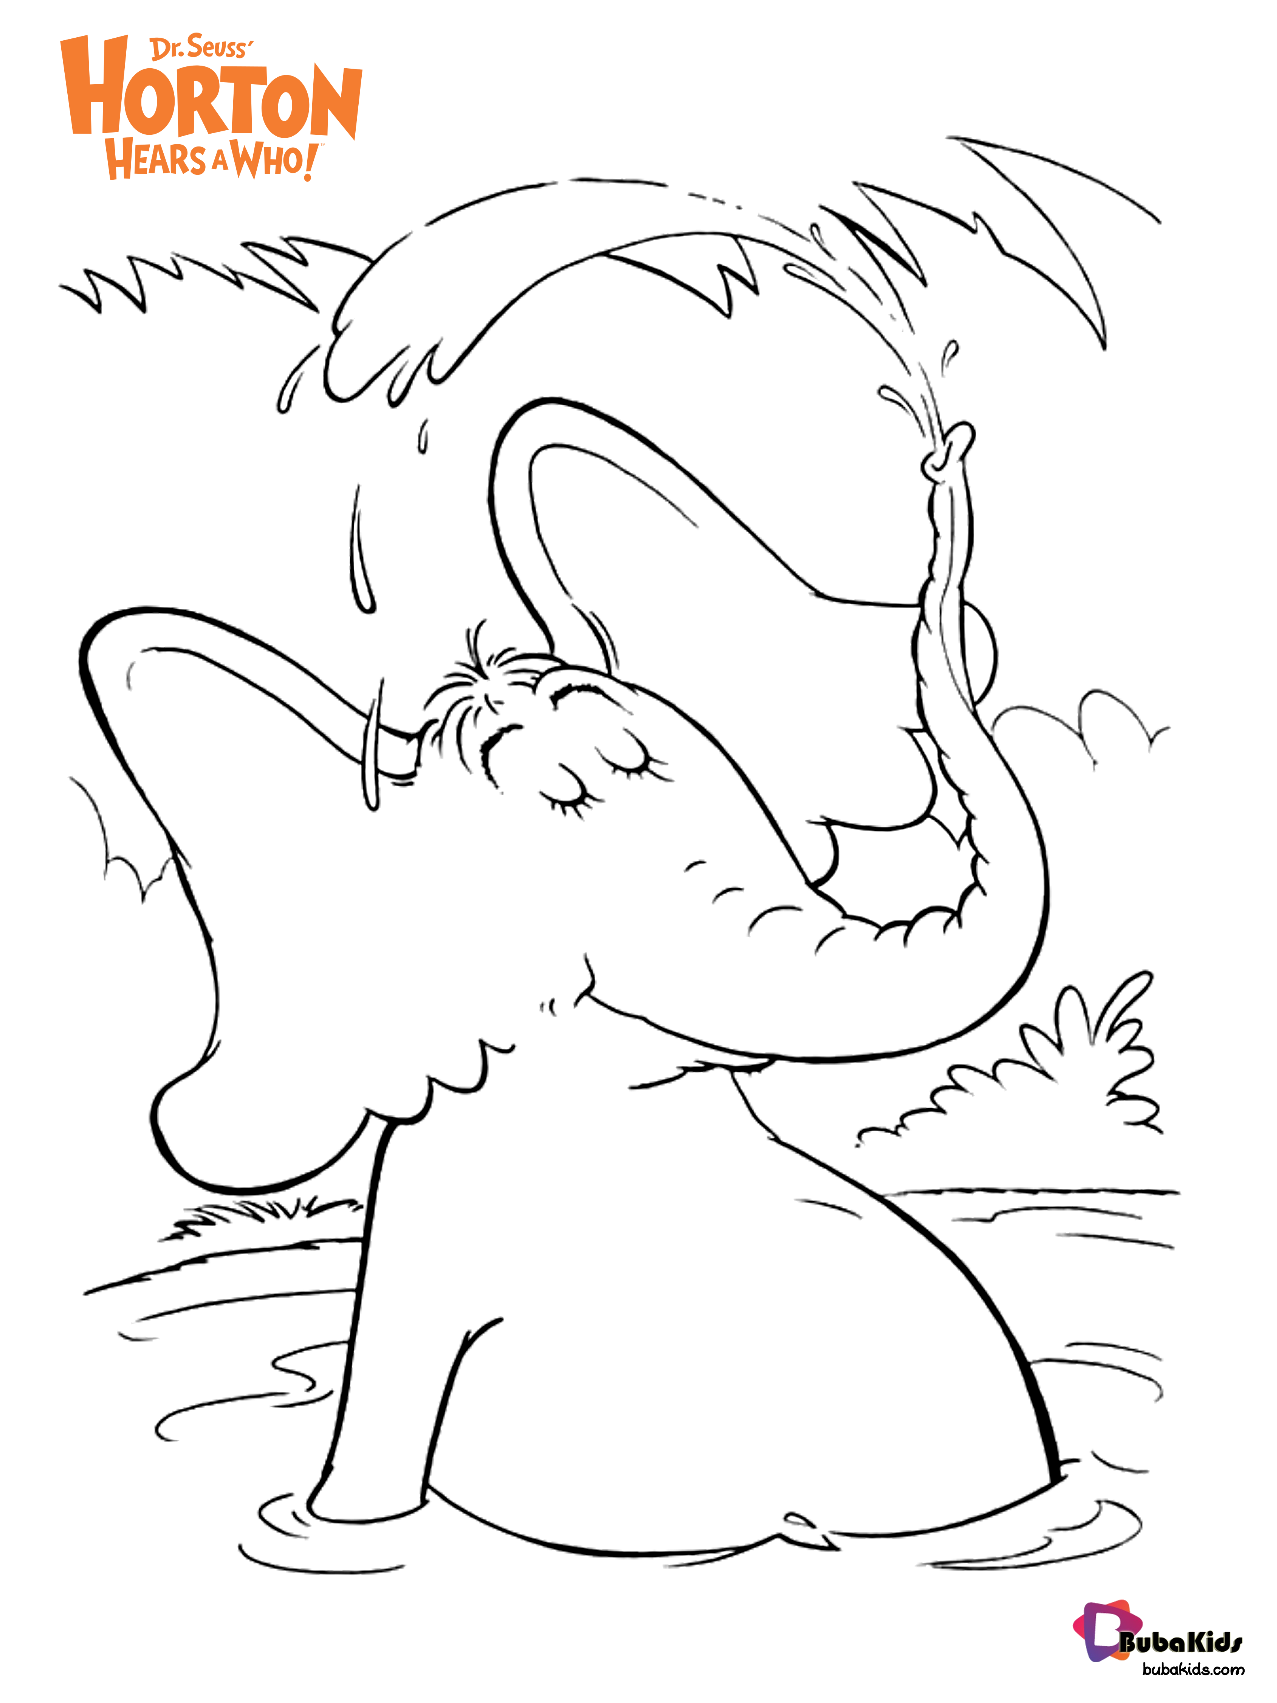 Horton the elephant dr seuss horton hears a who free download coloring pages Wallpaper